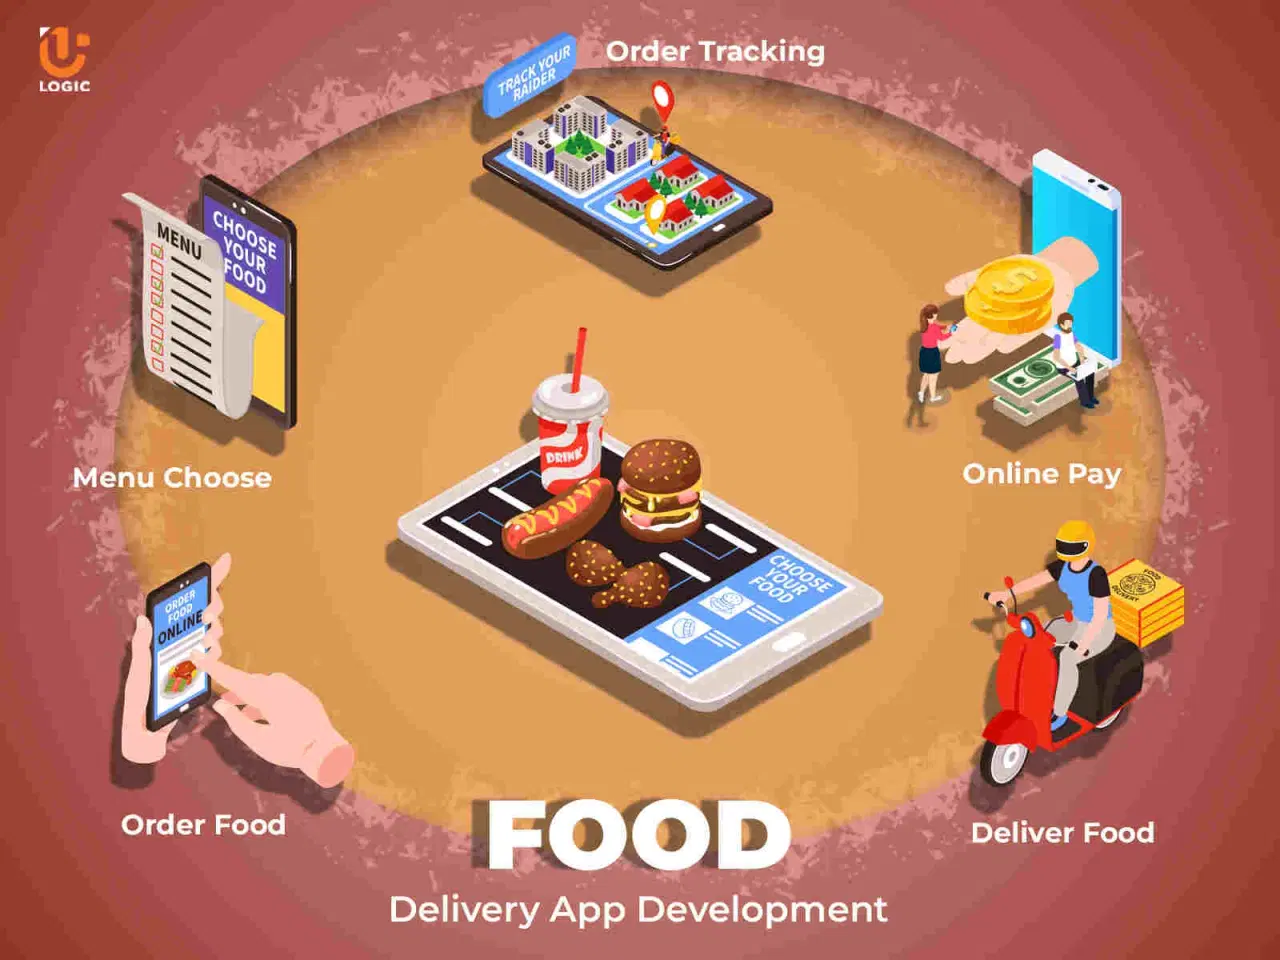 Billede 1 - Looking to take your food delivery business to the